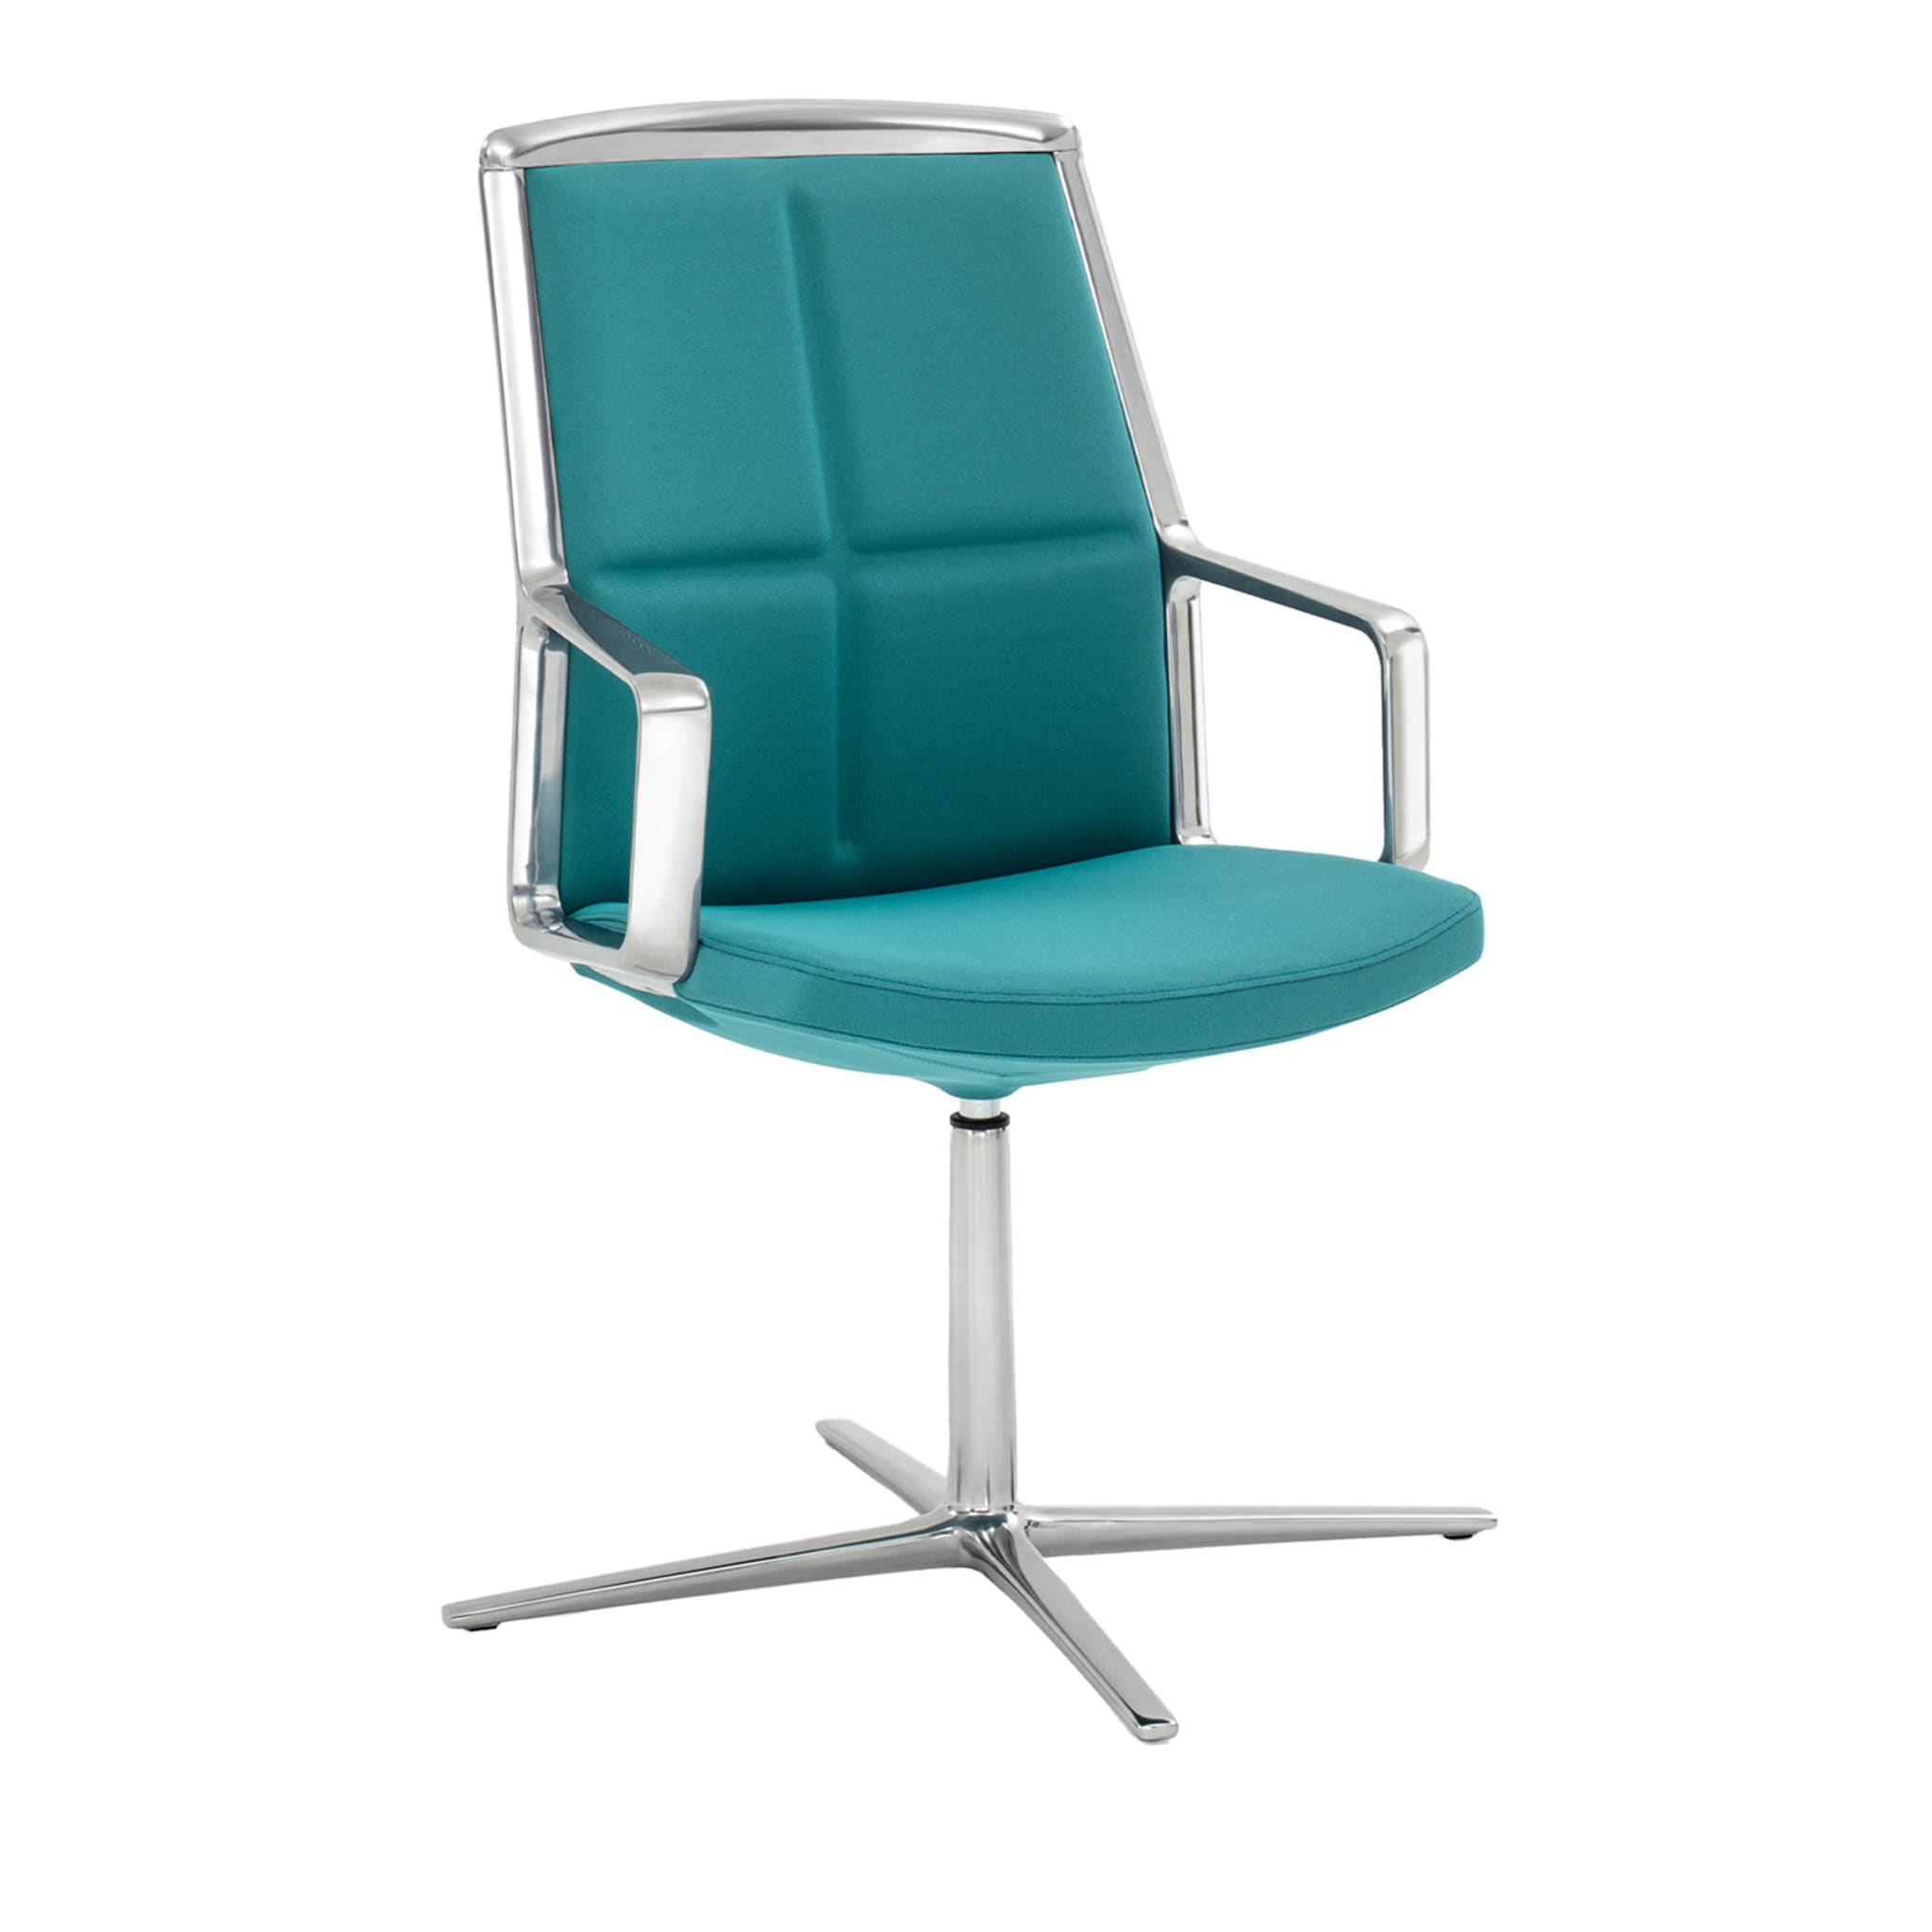 ADELE BLUE-GREEN MEETING CHAIR #1 by ORLANDINIDESIGN - Main view